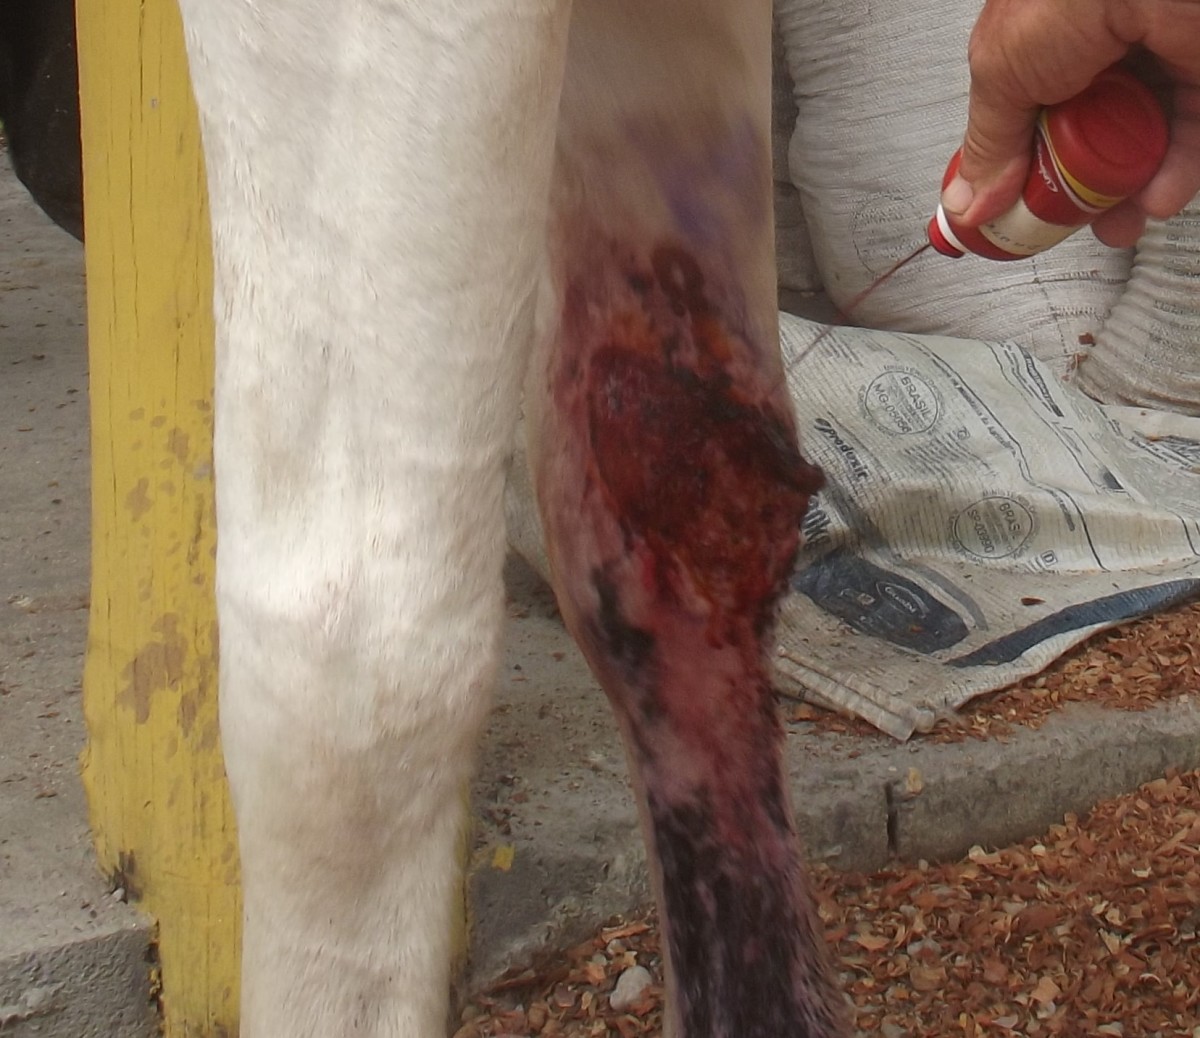 Clean the wound just before bandaging.